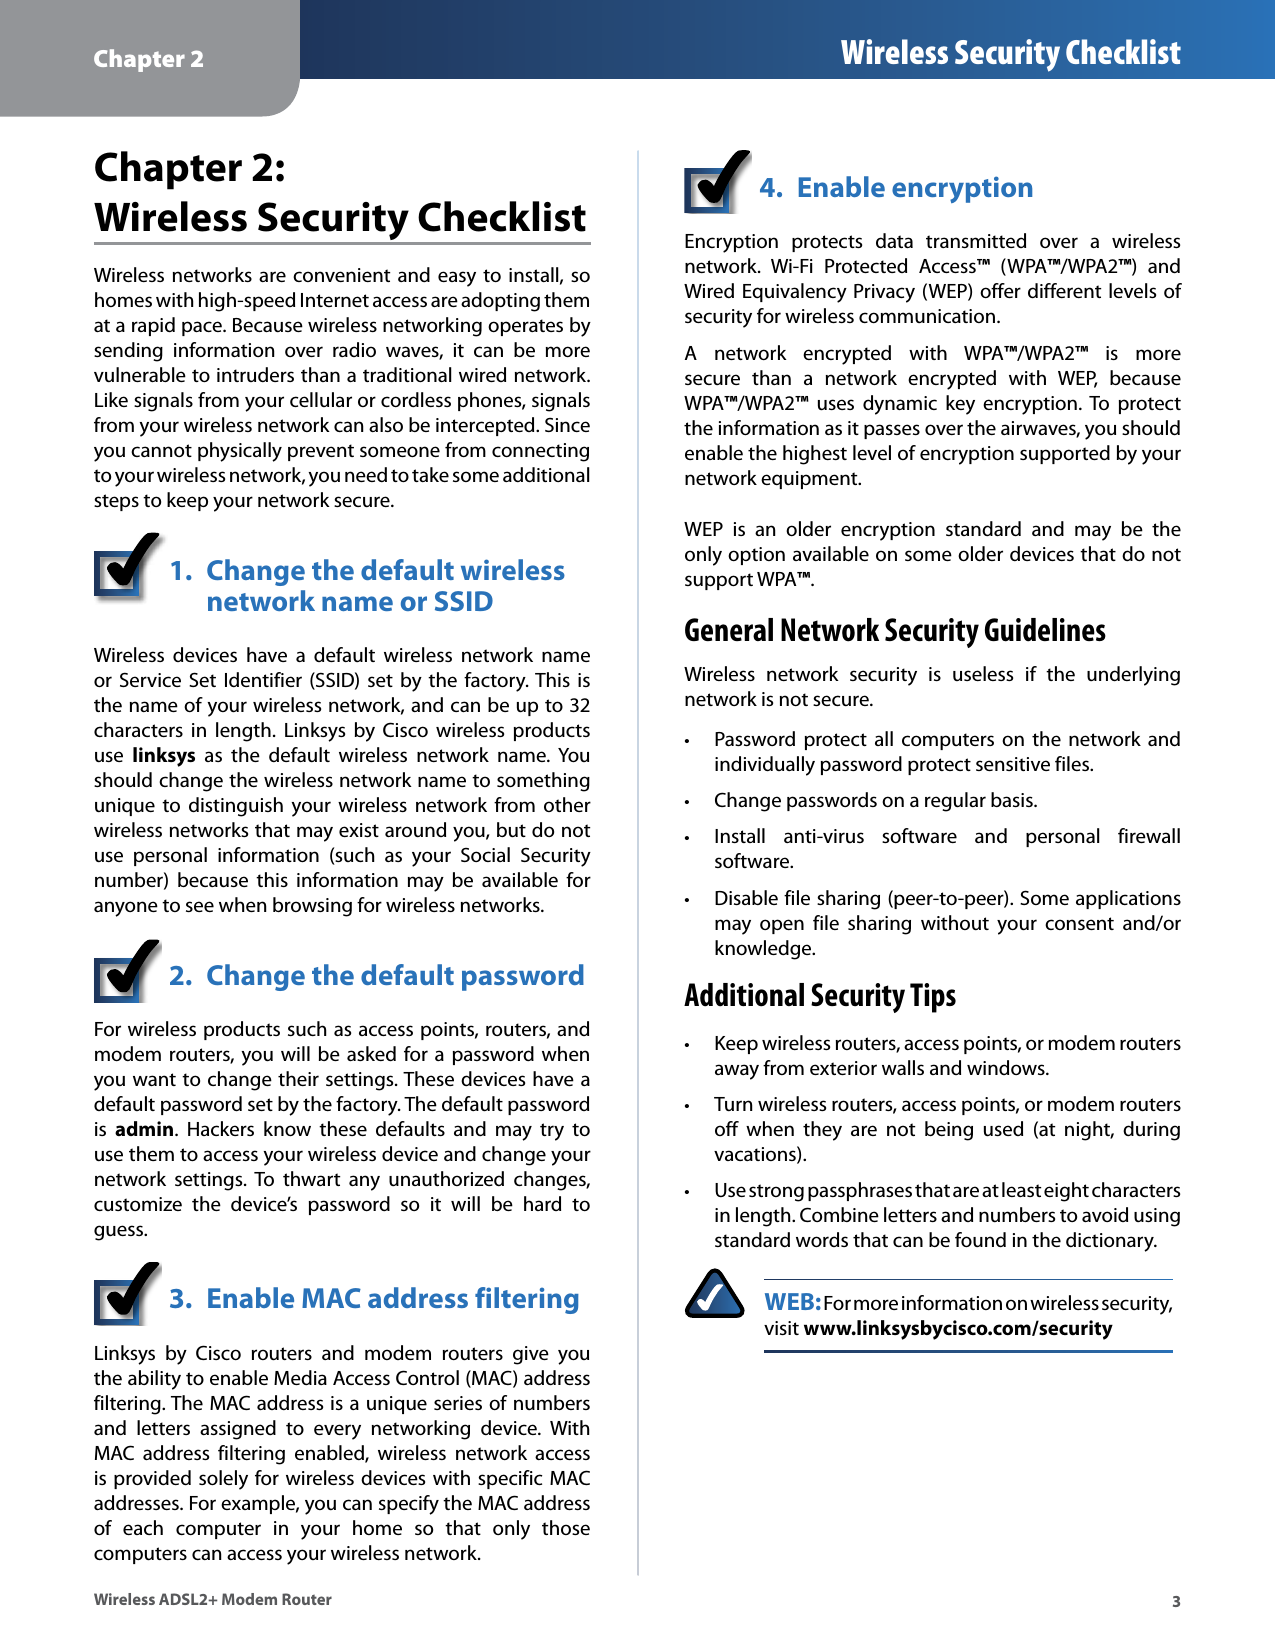 Chapter 2 Wireless Security Checklist3Wireless ADSL2+ Modem RouterChapter 2:  Wireless Security ChecklistWireless networks are convenient and  easy to  install, so homes with high-speed Internet access are adopting them at a rapid pace. Because wireless networking operates by sending  information  over  radio  waves,  it  can  be  more vulnerable to intruders than a traditional wired network. Like signals from your cellular or cordless phones, signals from your wireless network can also be intercepted. Since you cannot physically prevent someone from connecting to your wireless network, you need to take some additional steps to keep your network secure. 1.  Change the default wireless    network name or SSIDWireless  devices  have  a  default  wireless  network  name or Service  Set  Identifier  (SSID) set  by the  factory. This  is the name of your wireless network, and can be up to 32 characters  in  length.  Linksys  by  Cisco  wireless  products use  linksys  as  the  default  wireless  network  name.  You should change the wireless network name to something unique  to  distinguish  your  wireless  network  from  other wireless networks that may exist around you, but do not use  personal  information  (such  as  your  Social  Security number)  because  this  information  may  be  available  for anyone to see when browsing for wireless networks. 2.  Change the default passwordFor wireless products such as access points, routers, and modem routers, you will be asked  for a password when you want to change their settings. These devices have a default password set by the factory. The default password is  admin.  Hackers  know  these  defaults  and  may  try  to use them to access your wireless device and change your network  settings.  To  thwart  any  unauthorized  changes, customize  the  device’s  password  so  it  will  be  hard  to guess.3.  Enable MAC address filteringLinksys  by  Cisco  routers  and  modem  routers  give  you the ability to enable Media Access Control (MAC) address filtering. The MAC address is a unique series of numbers and  letters  assigned  to  every  networking  device.  With MAC  address  filtering  enabled,  wireless  network  access is provided solely for wireless devices with specific MAC addresses. For example, you can specify the MAC address of  each  computer  in  your  home  so  that  only  those computers can access your wireless network. 4.  Enable encryptionEncryption  protects  data  transmitted  over  a  wireless network.  Wi-Fi  Protected  Access™  (WPA™/WPA2™)  and Wired Equivalency Privacy (WEP) offer different levels of security for wireless communication.A  network  encrypted  with  WPA™/WPA2™  is  more secure  than  a  network  encrypted  with  WEP,  because  WPA™/WPA2™  uses  dynamic  key  encryption.  To  protect the information as it passes over the airwaves, you should enable the highest level of encryption supported by your network equipment. WEP  is  an  older  encryption  standard  and  may  be  the only option available on some older devices that do not support WPA™.General Network Security GuidelinesWireless  network  security  is  useless  if  the  underlying network is not secure.  • Password protect  all  computers  on  the  network  and individually password protect sensitive files. • Change passwords on a regular basis. • Install  anti-virus  software  and  personal  firewall software. • Disable file sharing (peer-to-peer). Some applications may  open  file  sharing  without  your  consent  and/or knowledge.Additional Security Tips • Keep wireless routers, access points, or modem routers away from exterior walls and windows. • Turn wireless routers, access points, or modem routers off  when  they  are  not  being  used  (at  night,  during vacations). • Use strong passphrases that are at least eight characters in length. Combine letters and numbers to avoid using standard words that can be found in the dictionary. WEB: For more information on wireless security, visit www.linksysbycisco.com/security